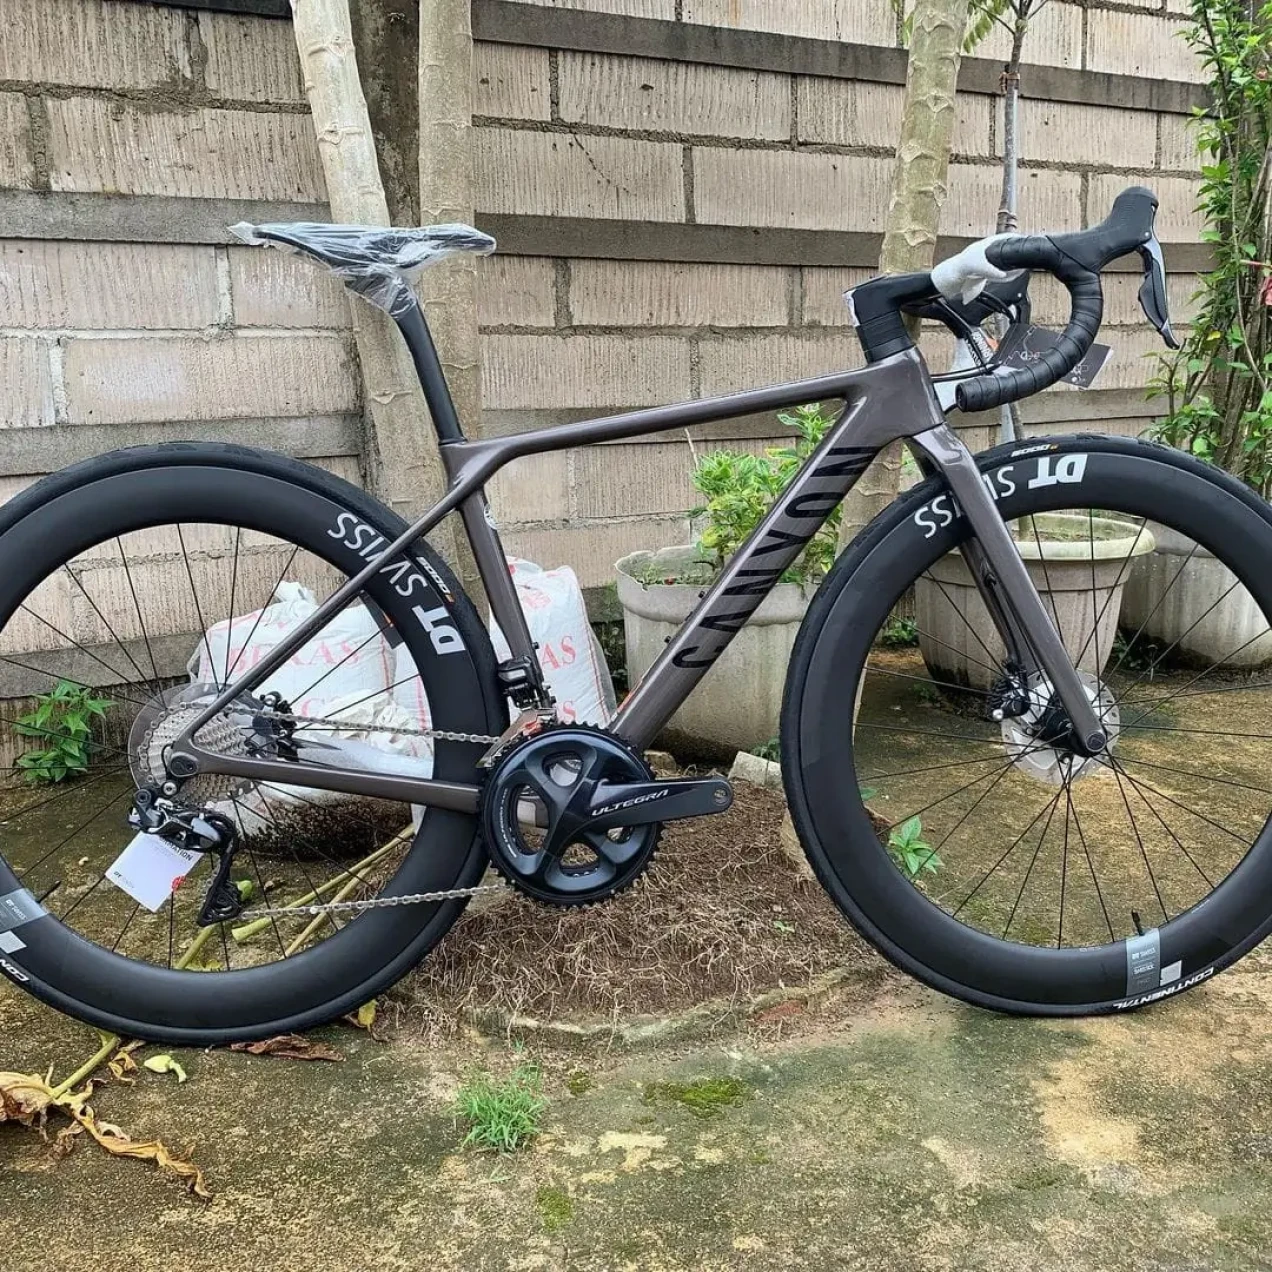 Canyon Ultimate CF SL 8 Disc Aero used in M | buycycle